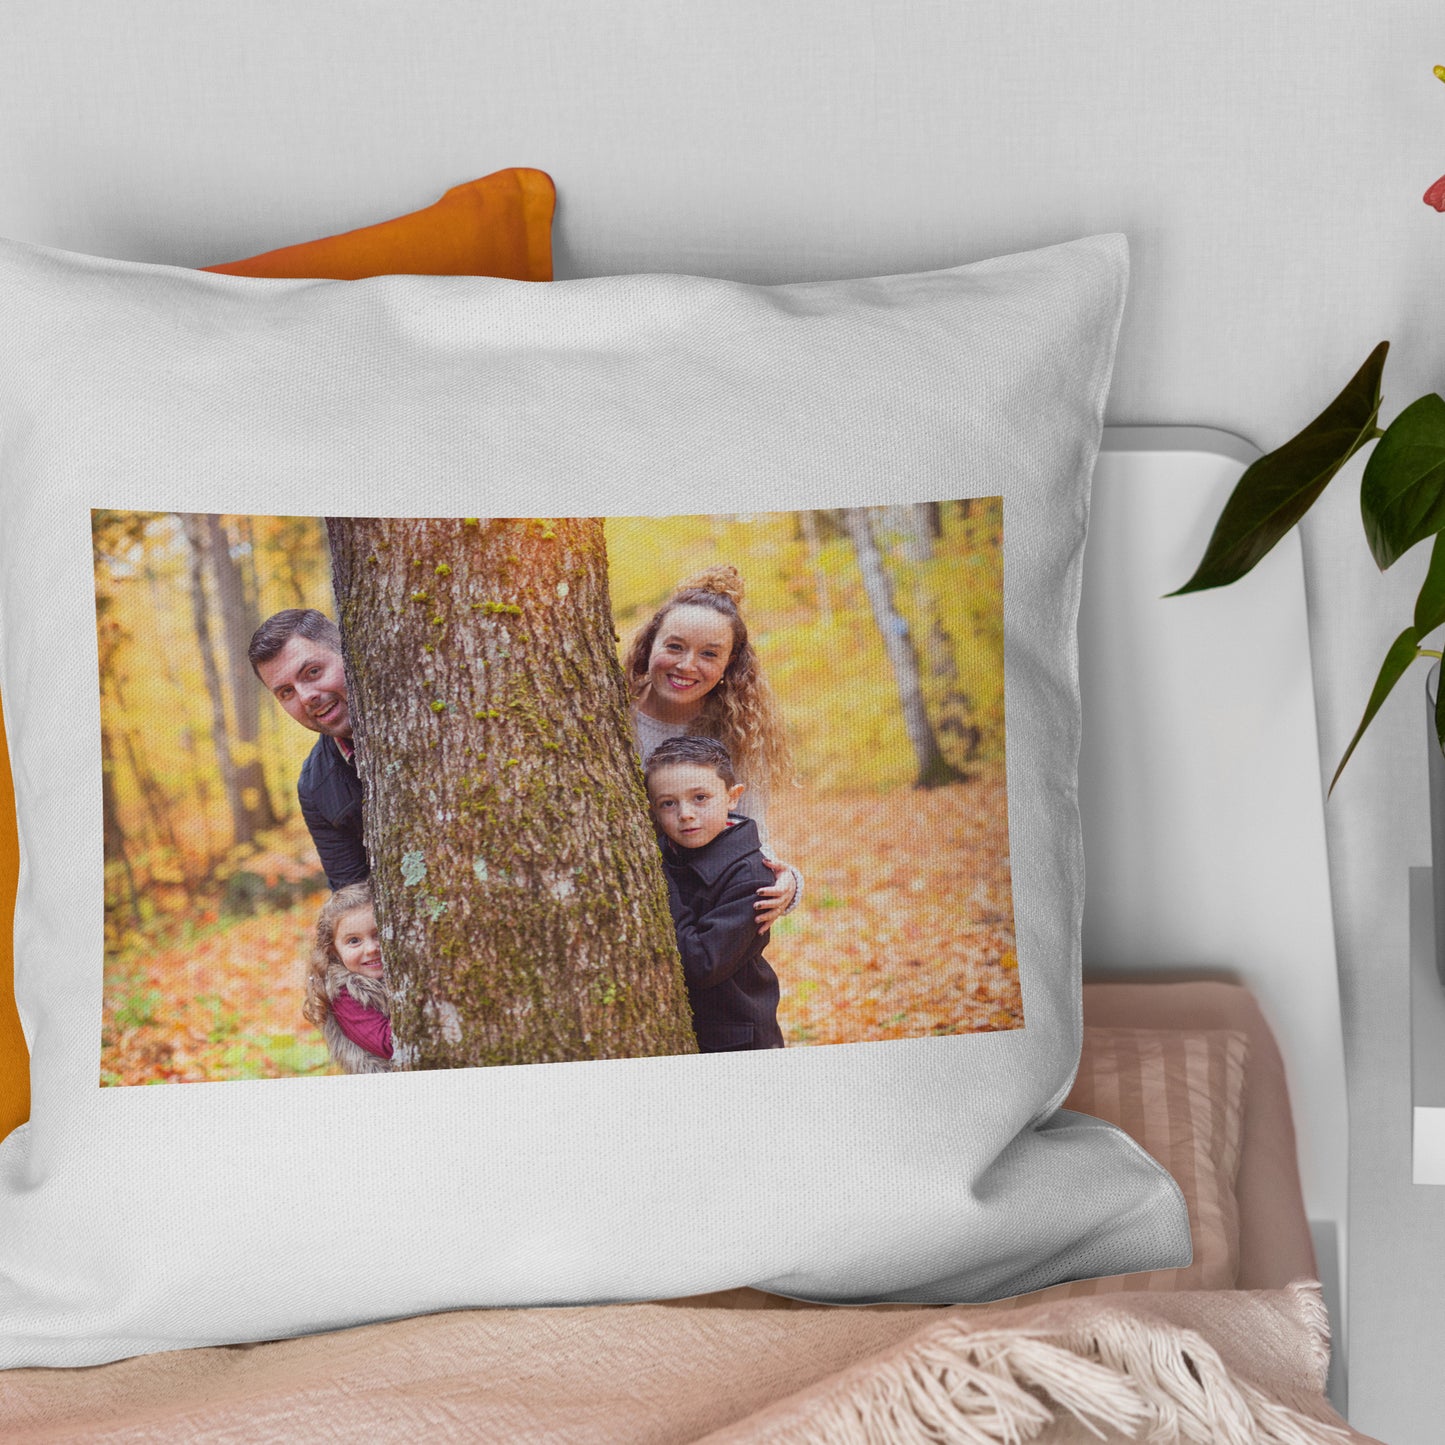 Personalised Cushion Cover Throw Pillow Cover Cushion Cover for Sofa Bed Home Decor